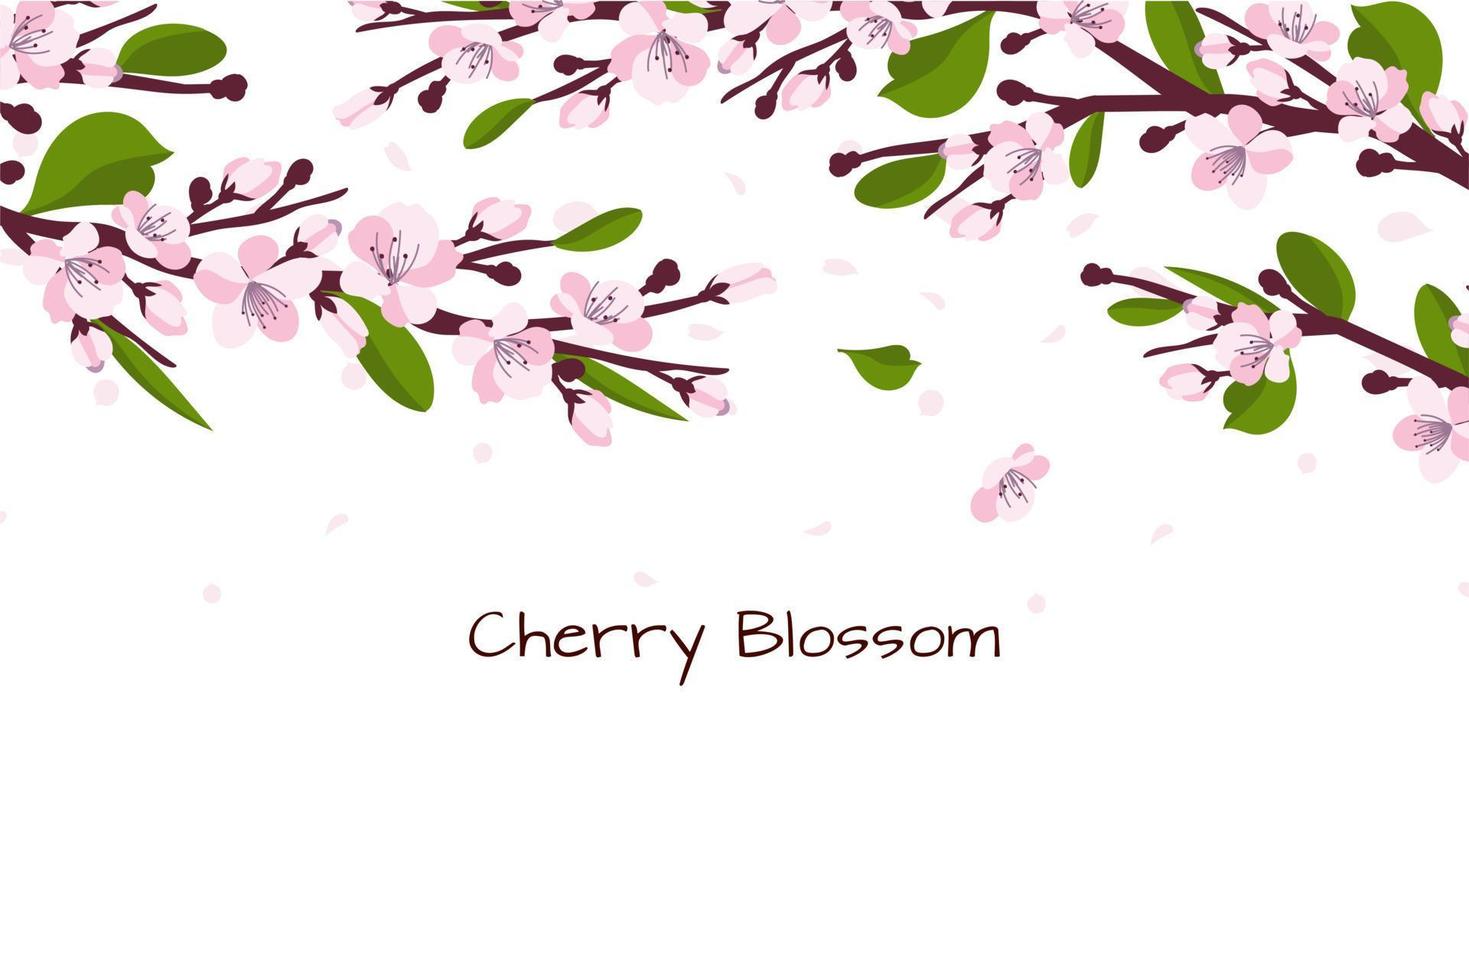 Background with cherry blossom. A branch with cherry blossoms isolated on a white background. Japanese sakura. Vector illustration